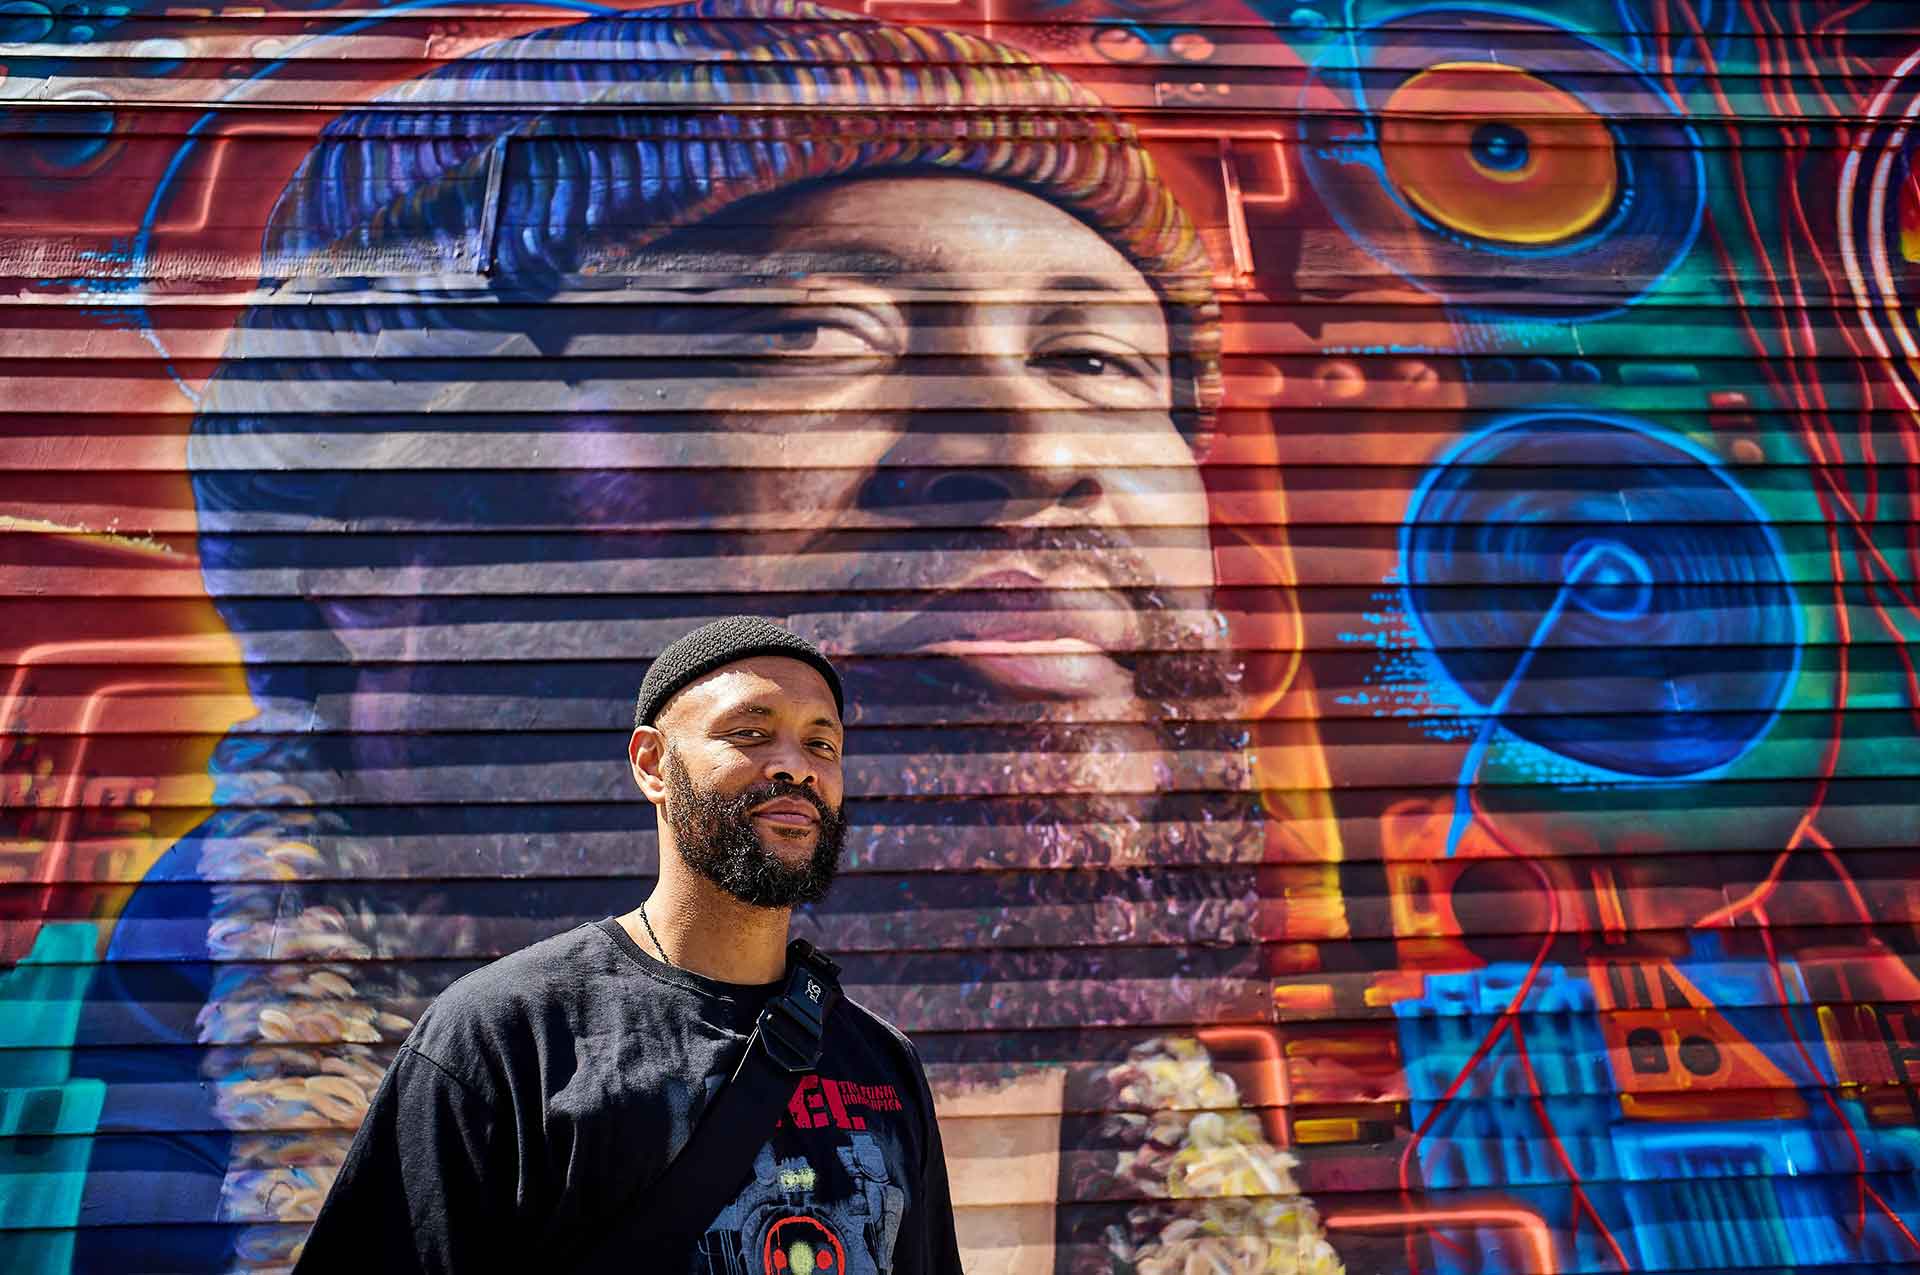 Tajai of Souls of Mischief poses in front of his own likeness, painted as part of a mural in East Oakland.